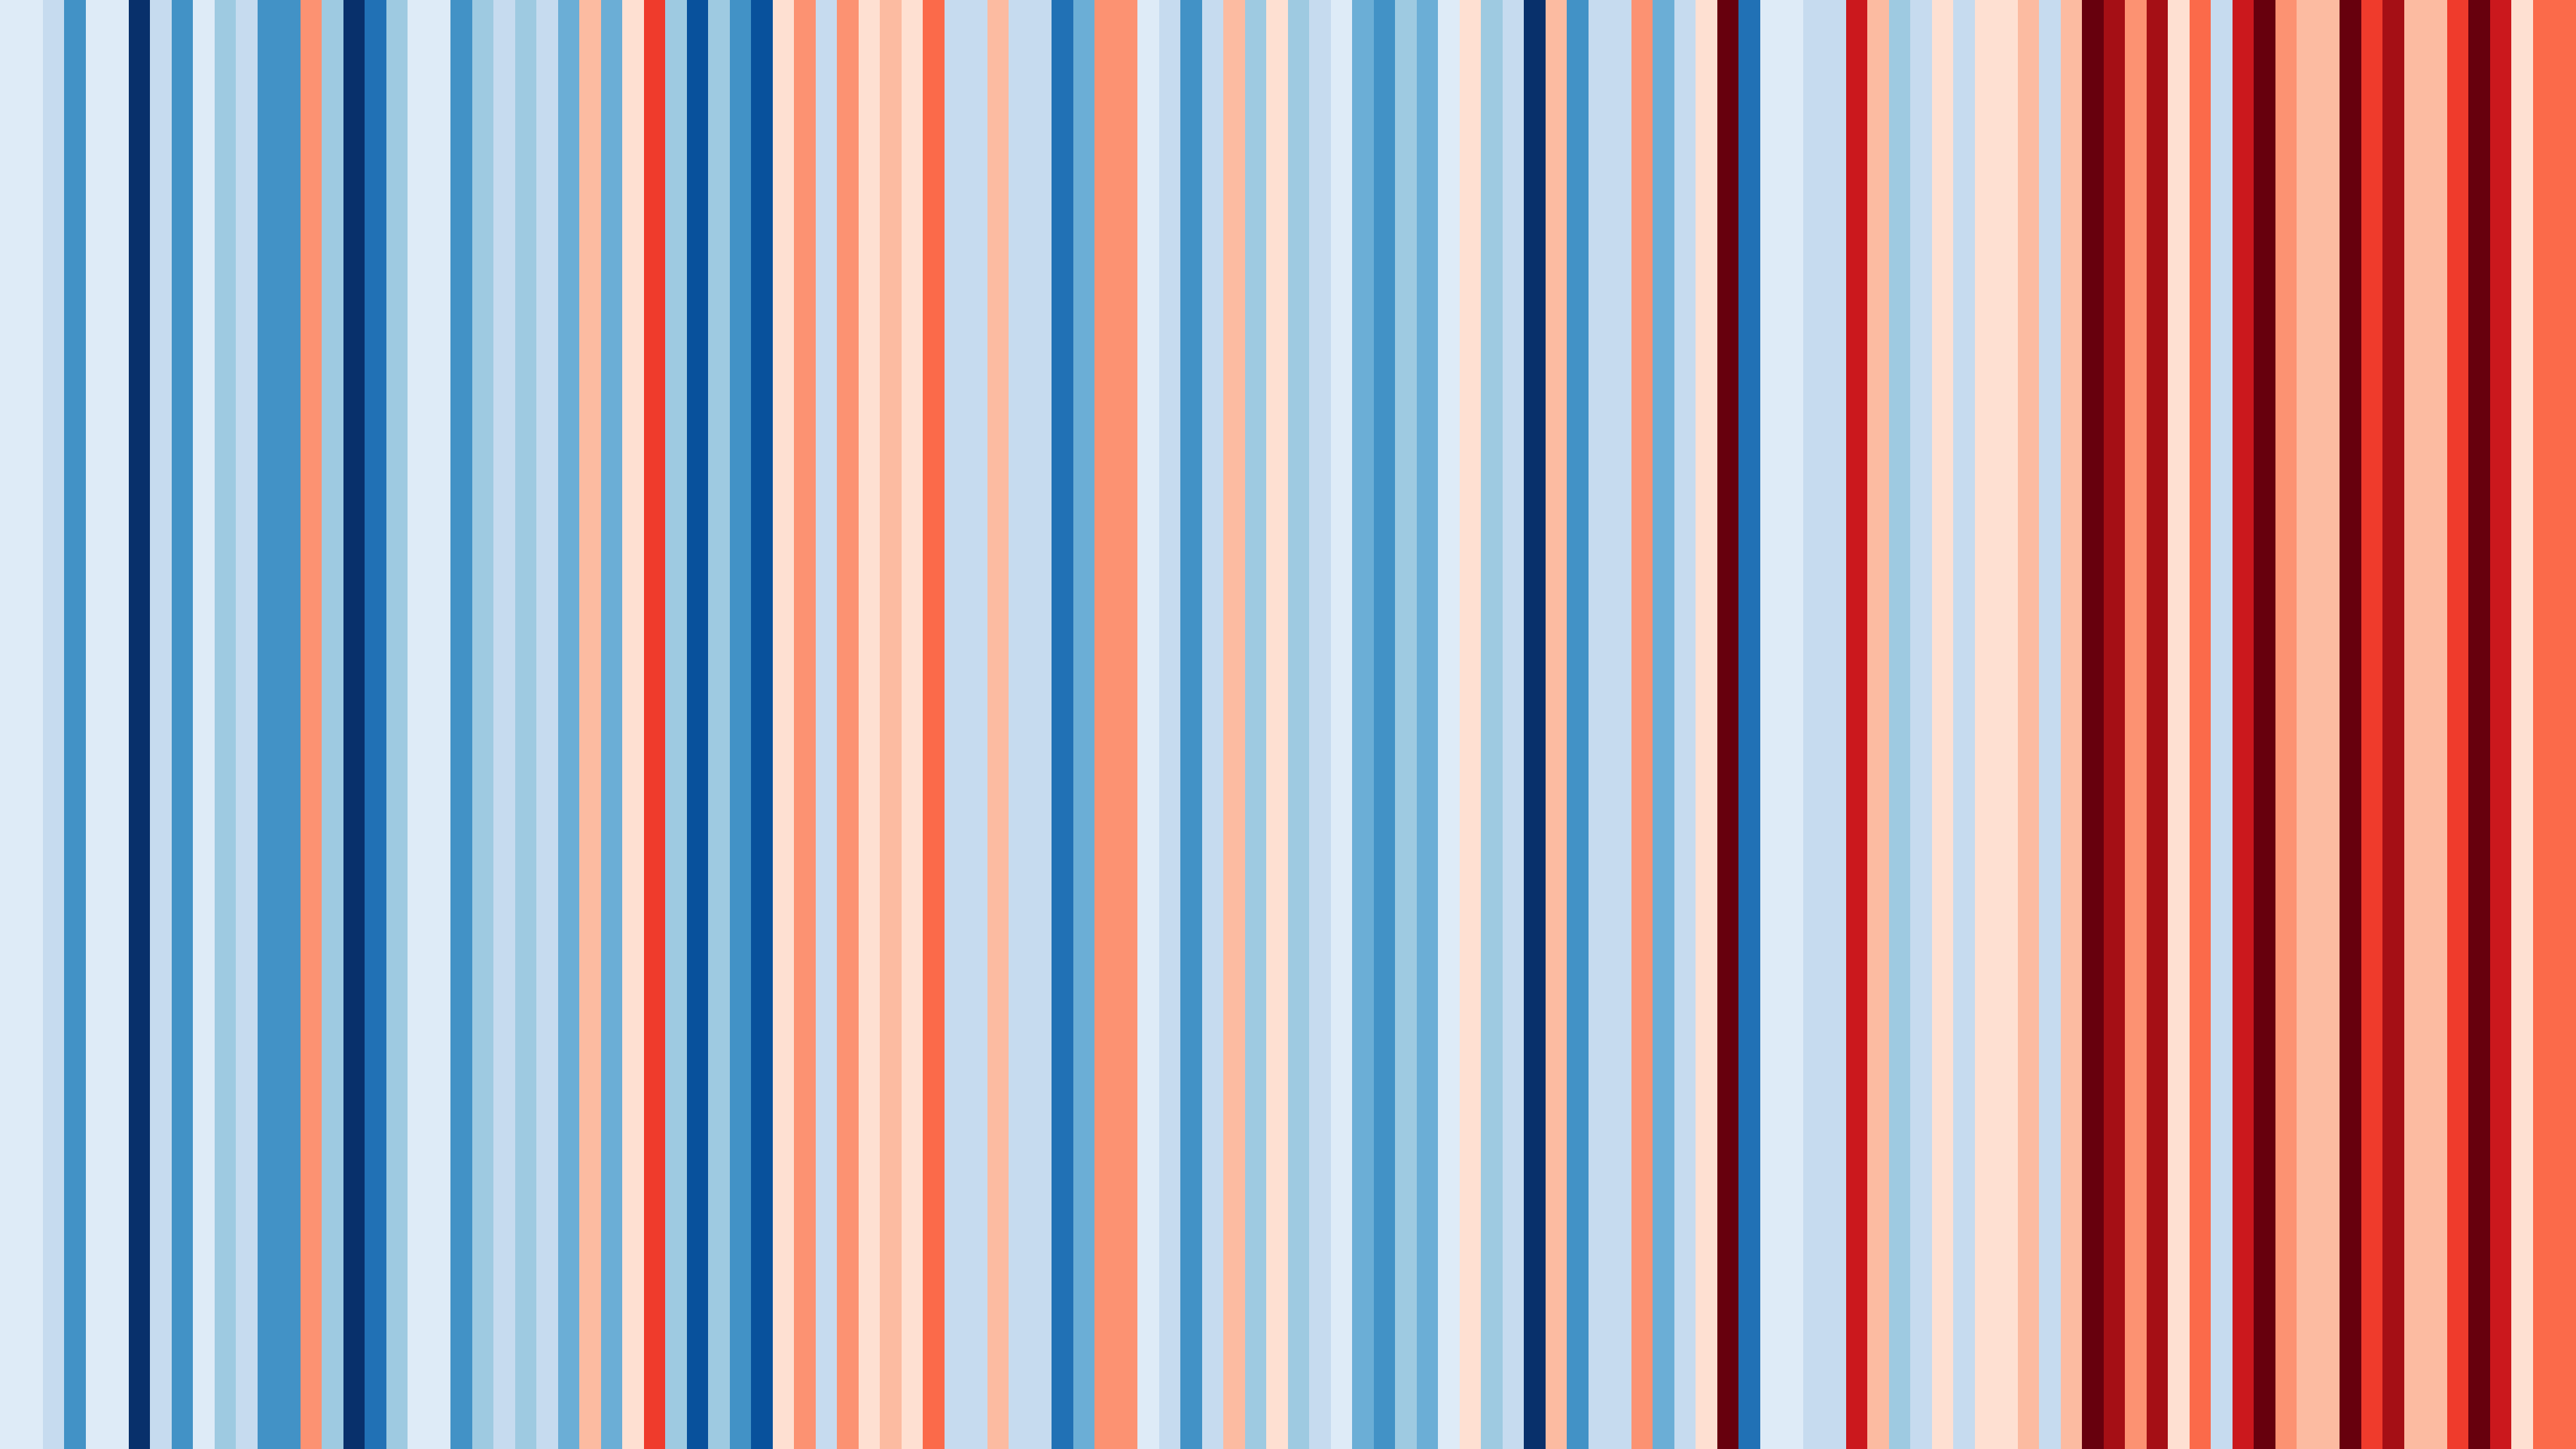 A series of vertical stripes in various shades of blue and red representing temperature. The overall from left to right is shades of blue to shades of red. 